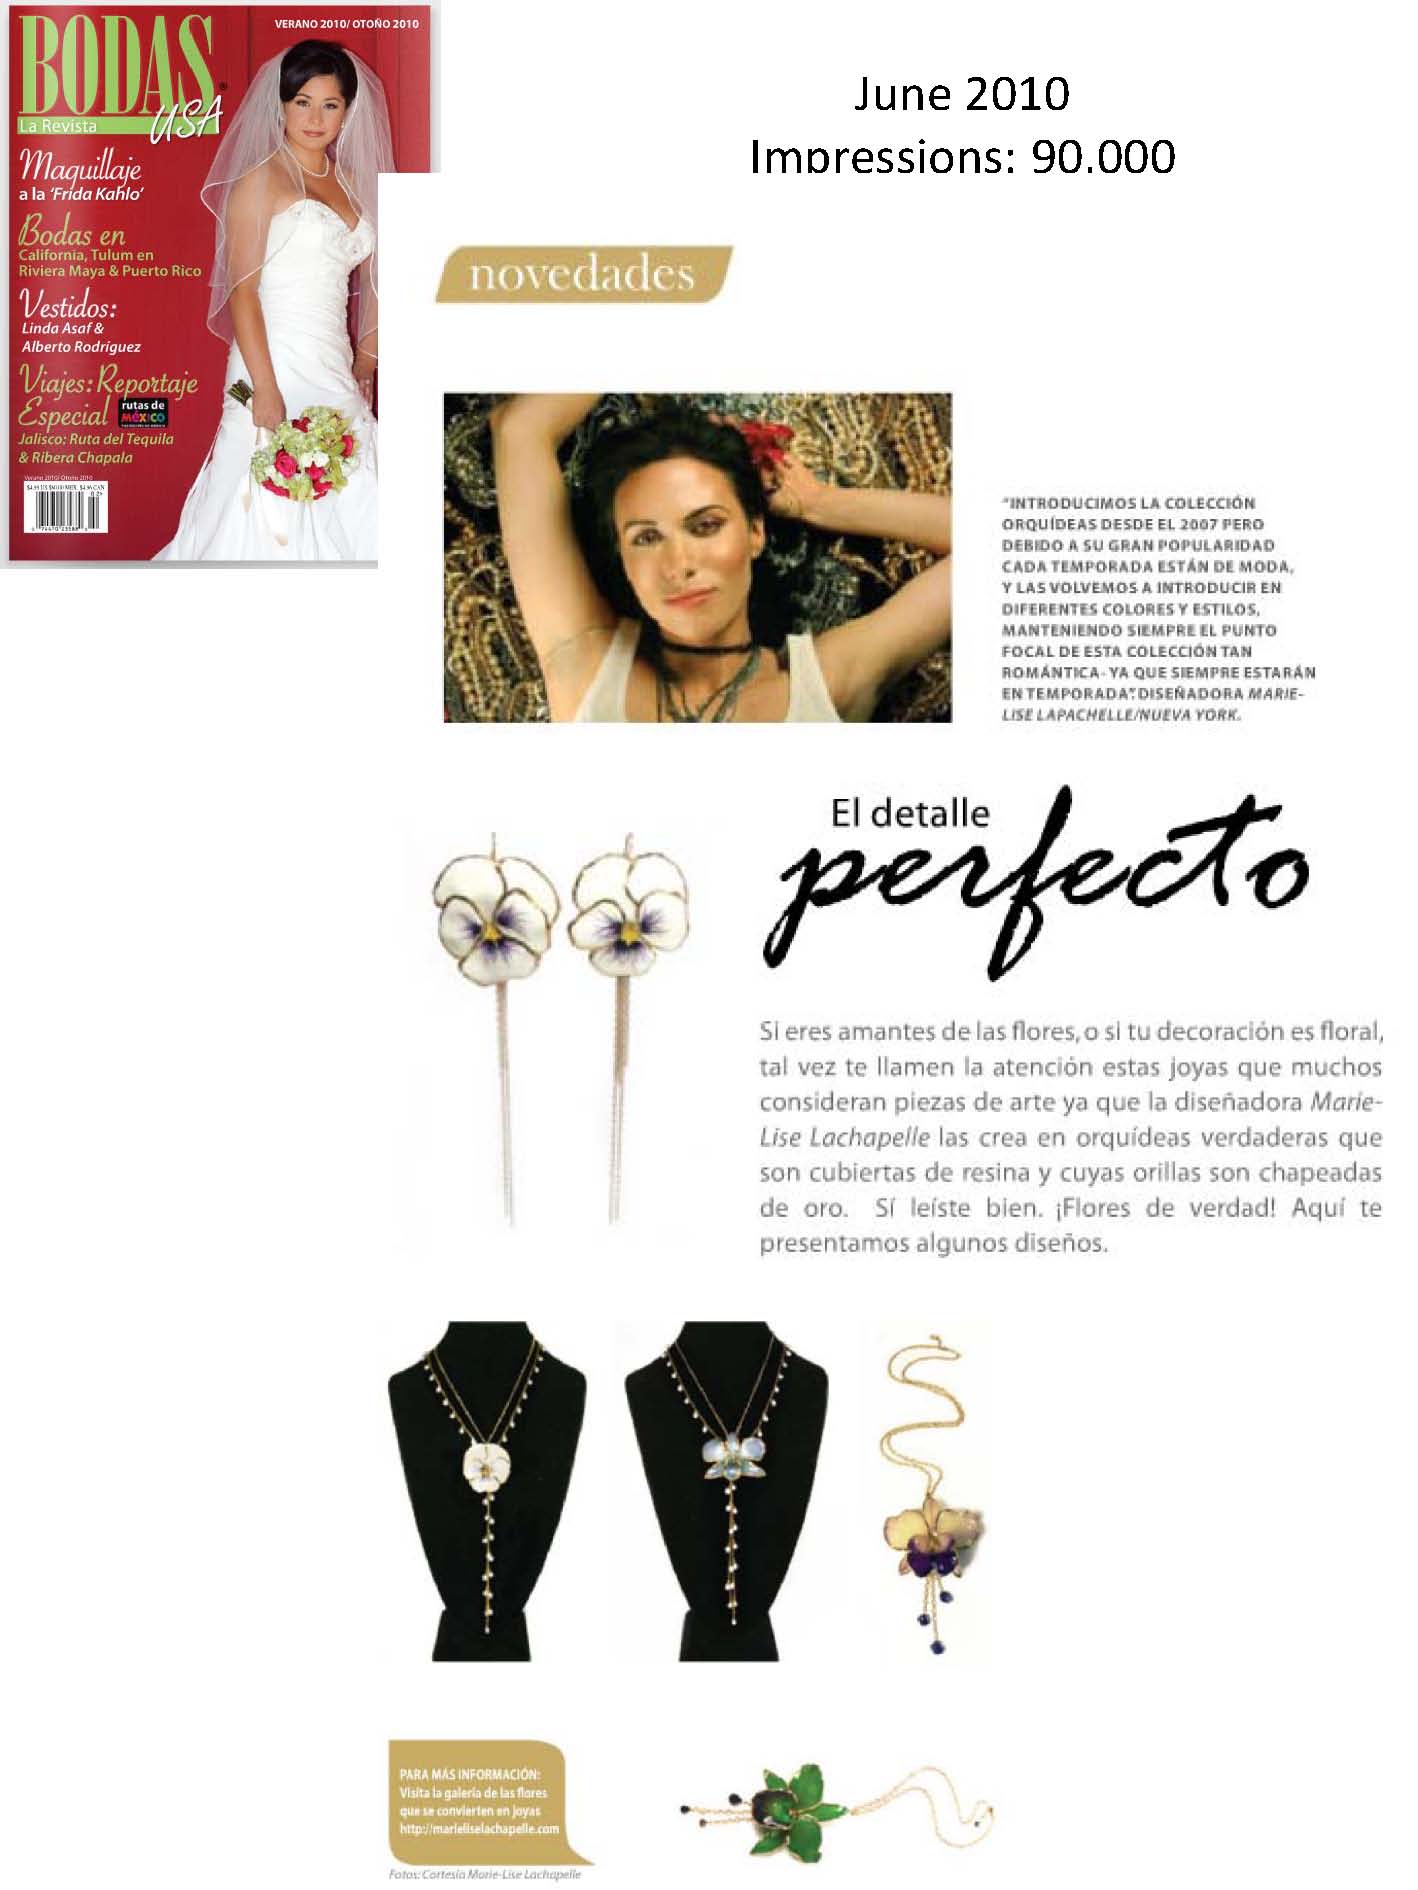 Marie-Lise Lachapelle's Gorgeous Jewelry Receives a 1-Page Spread in Bodas USA Bridal Magazine (Fashion PR)